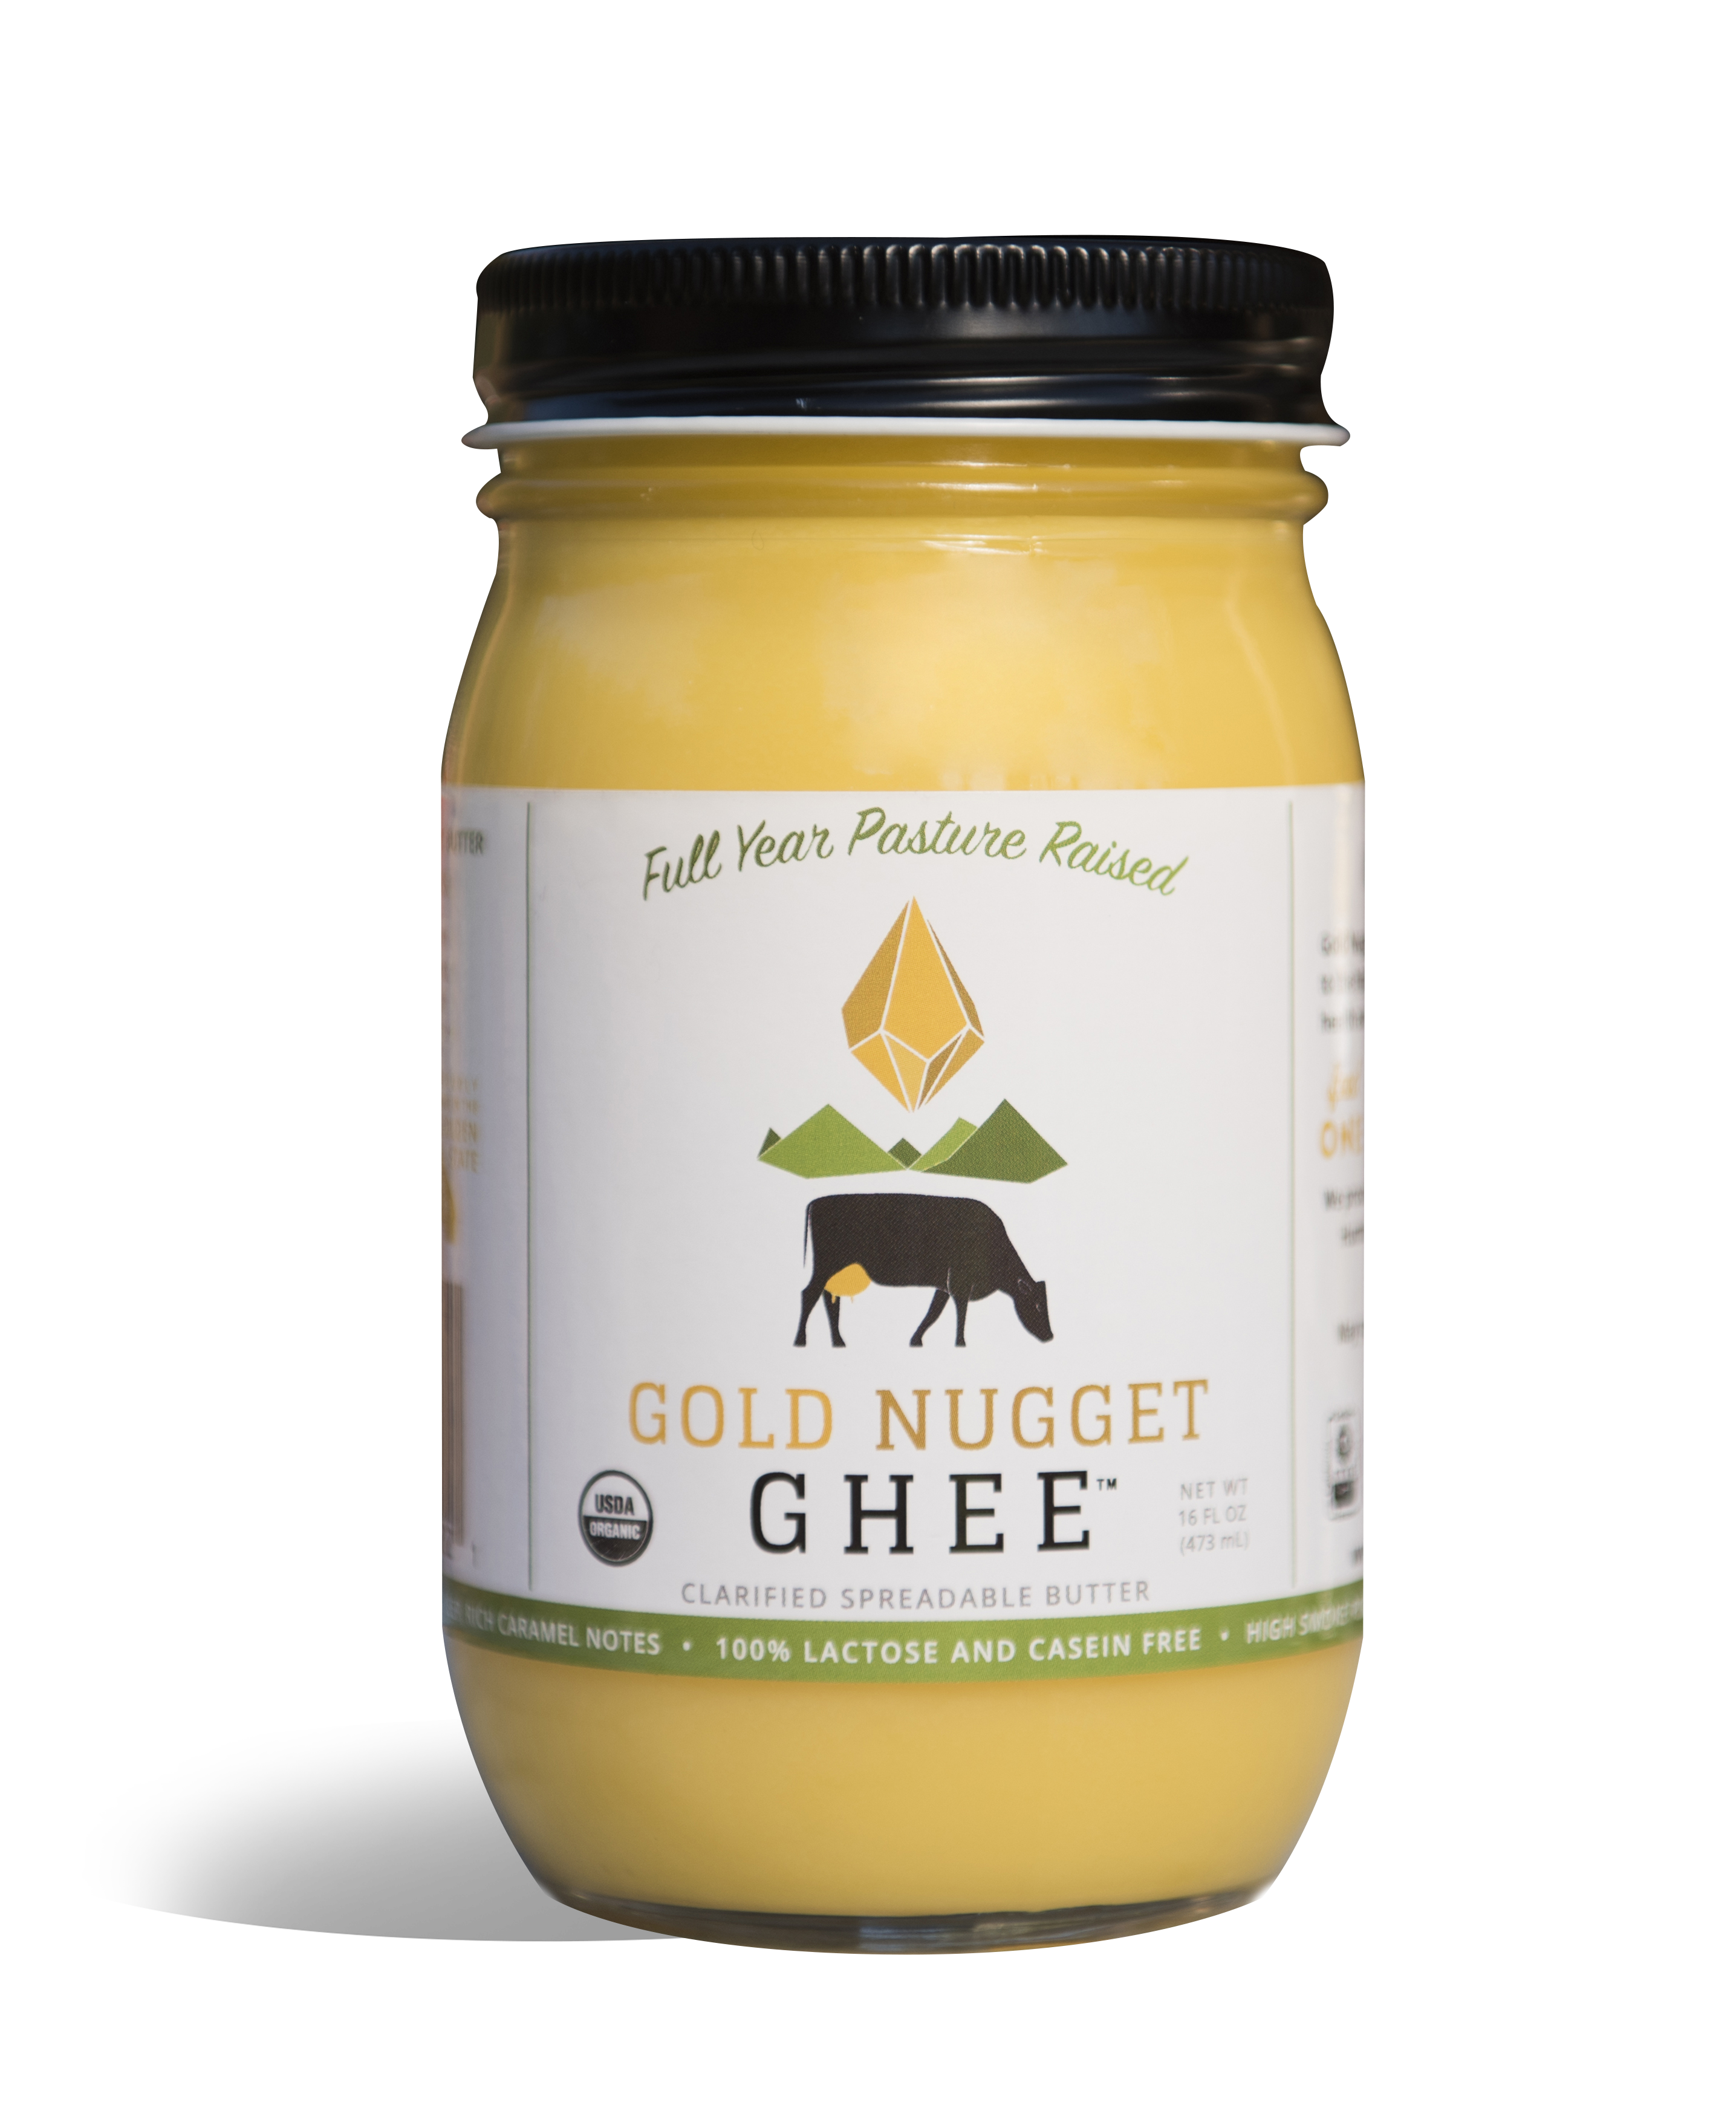 Traditional Ghee